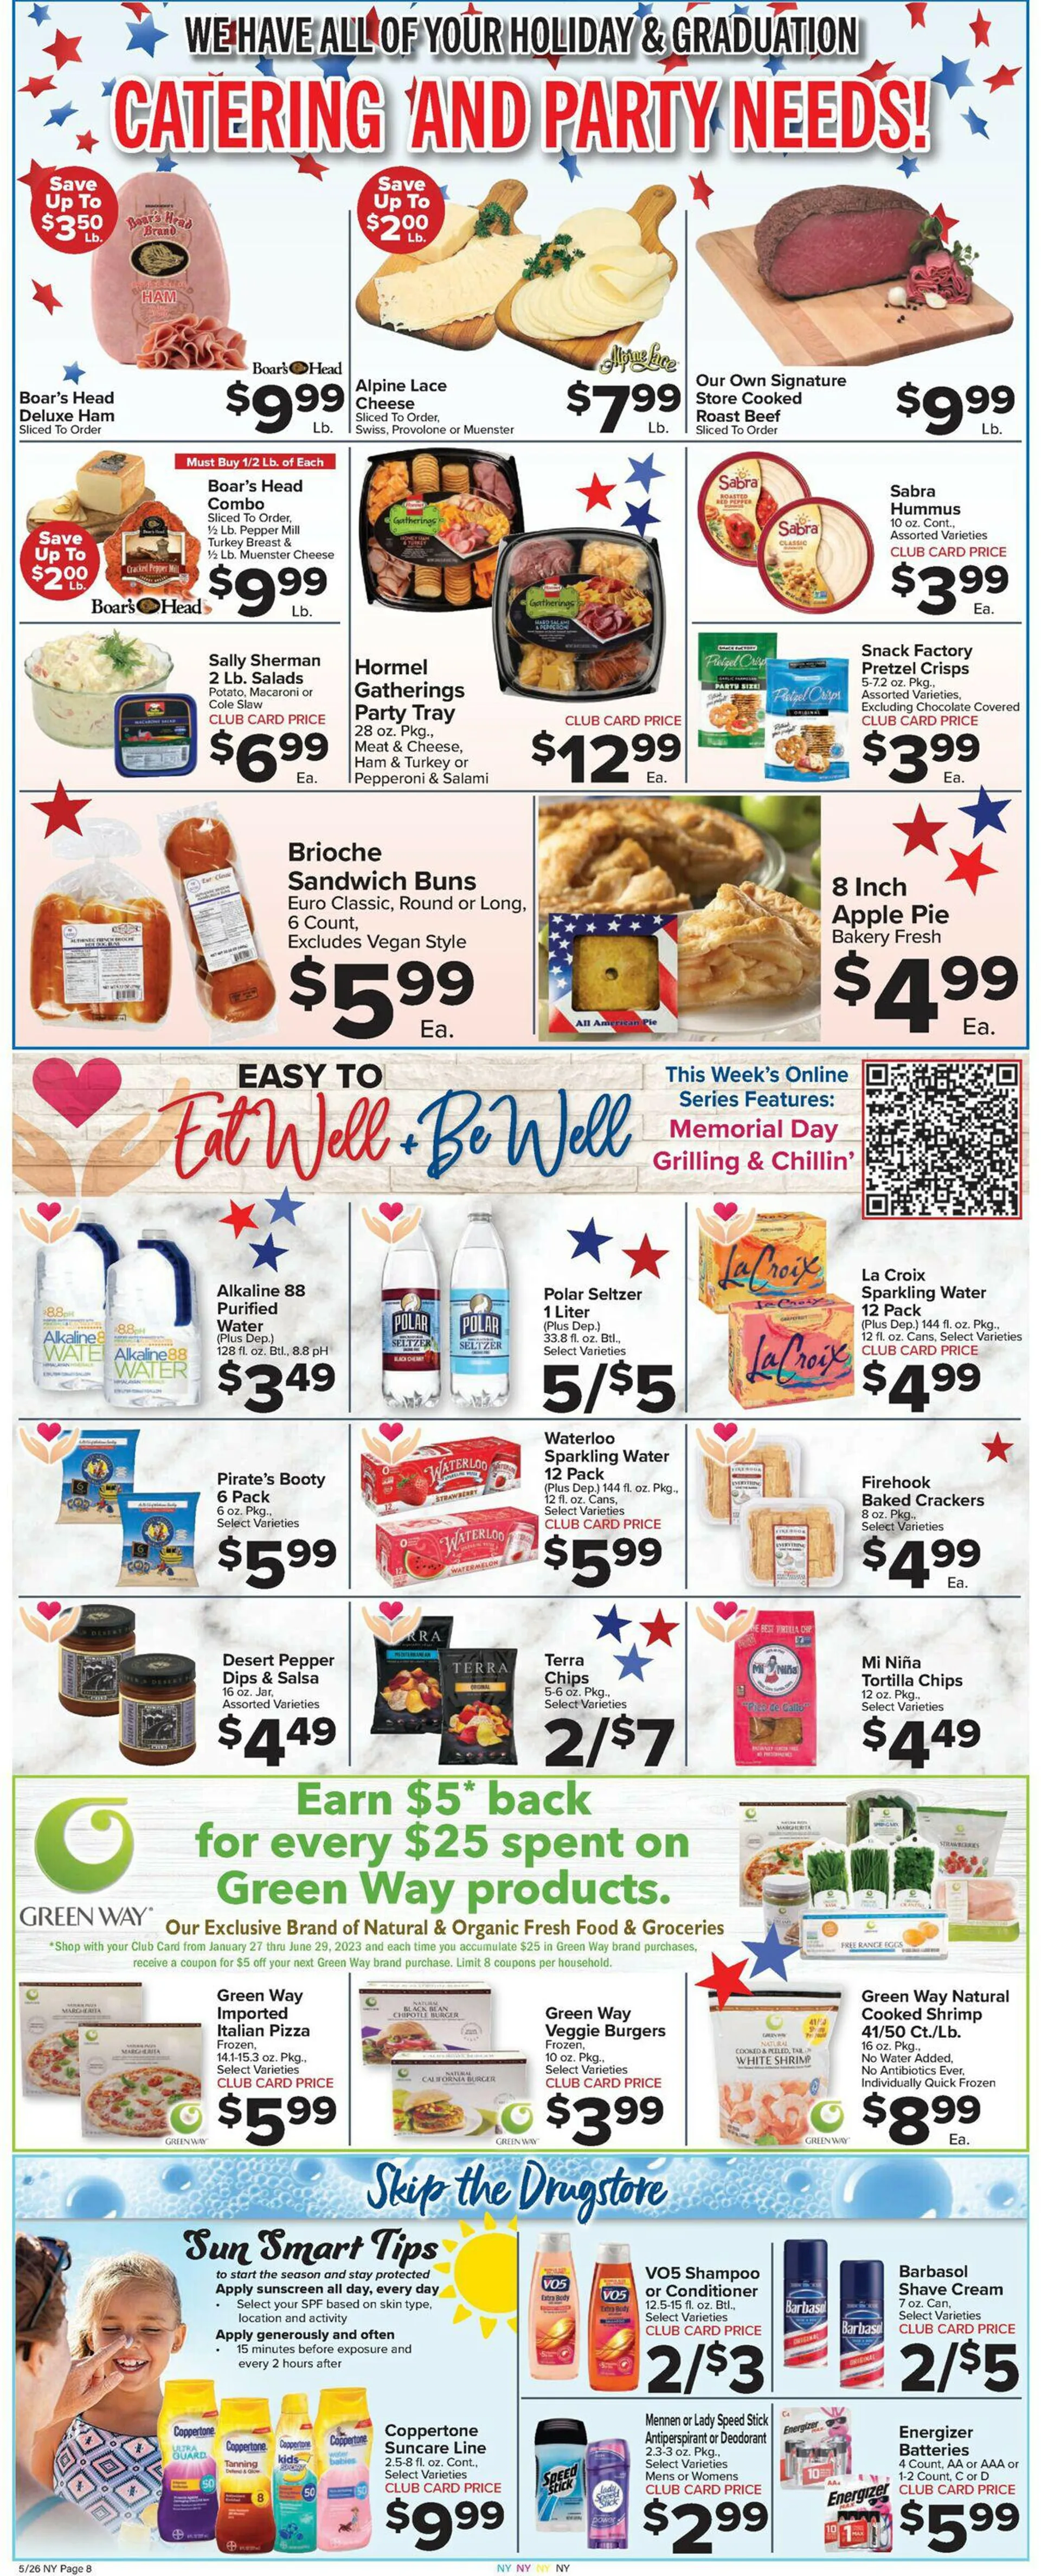 Foodtown Current weekly ad - 2